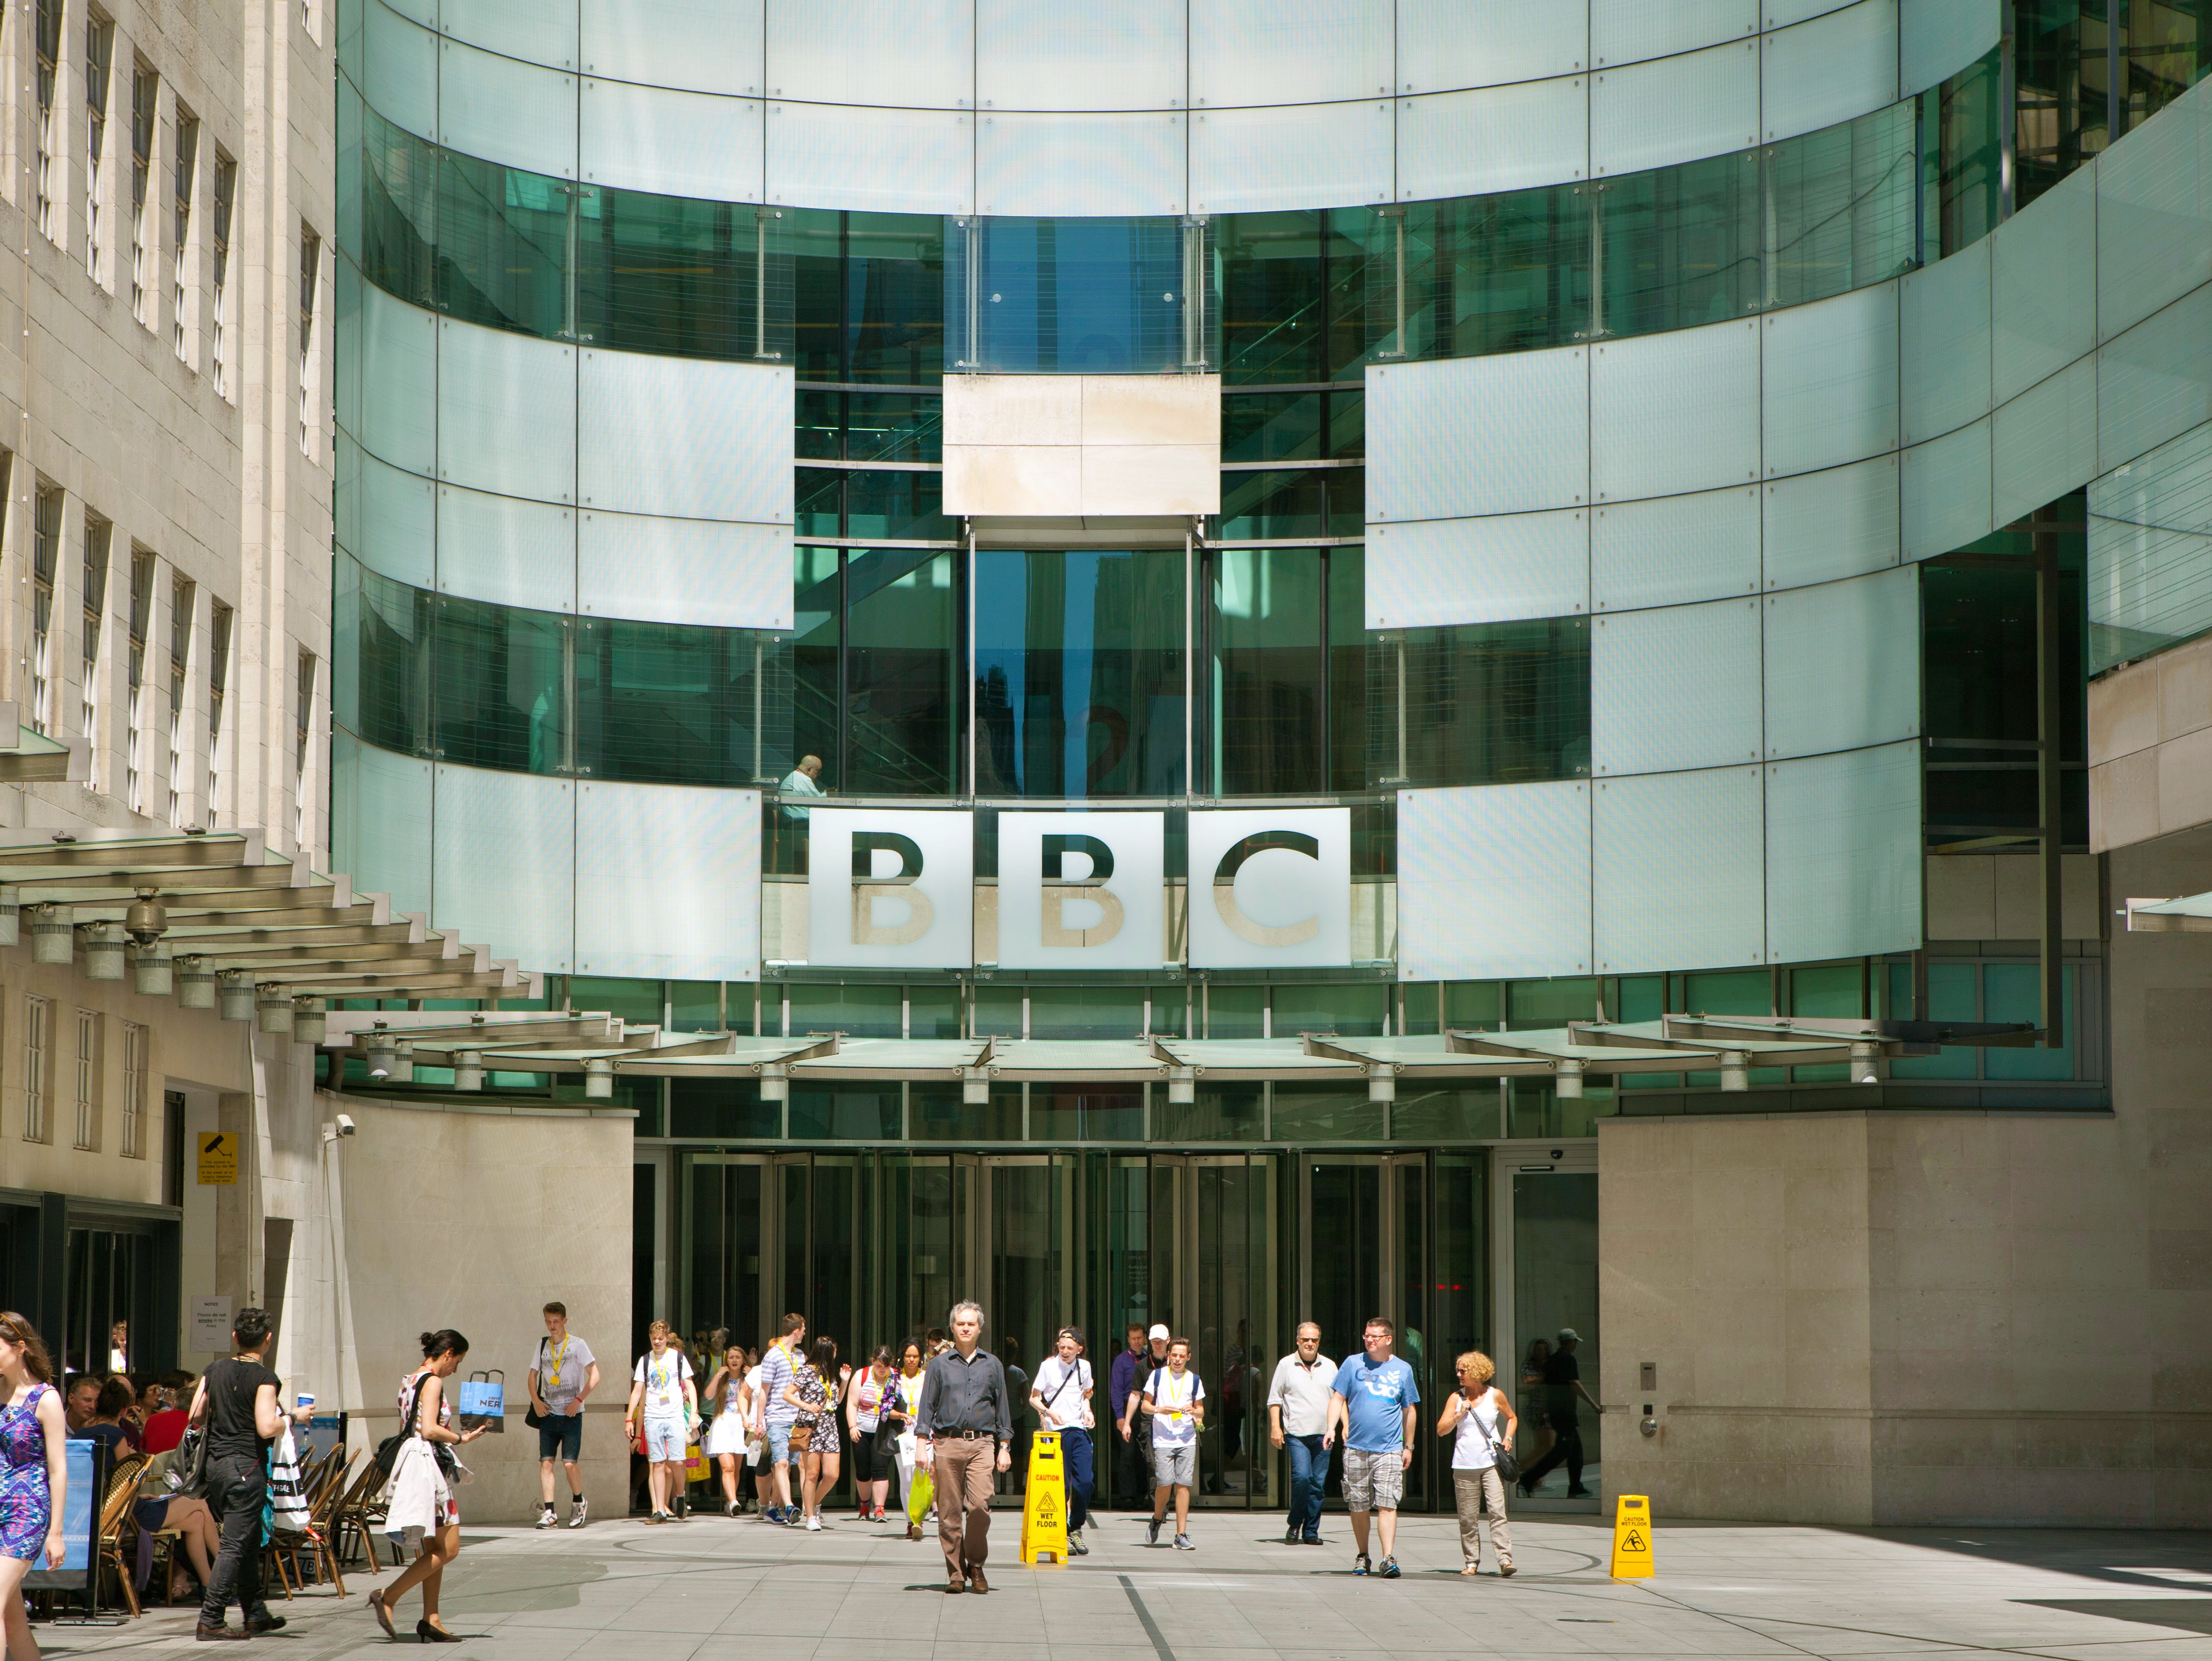 The BBC is set to close radio stations in its World Service